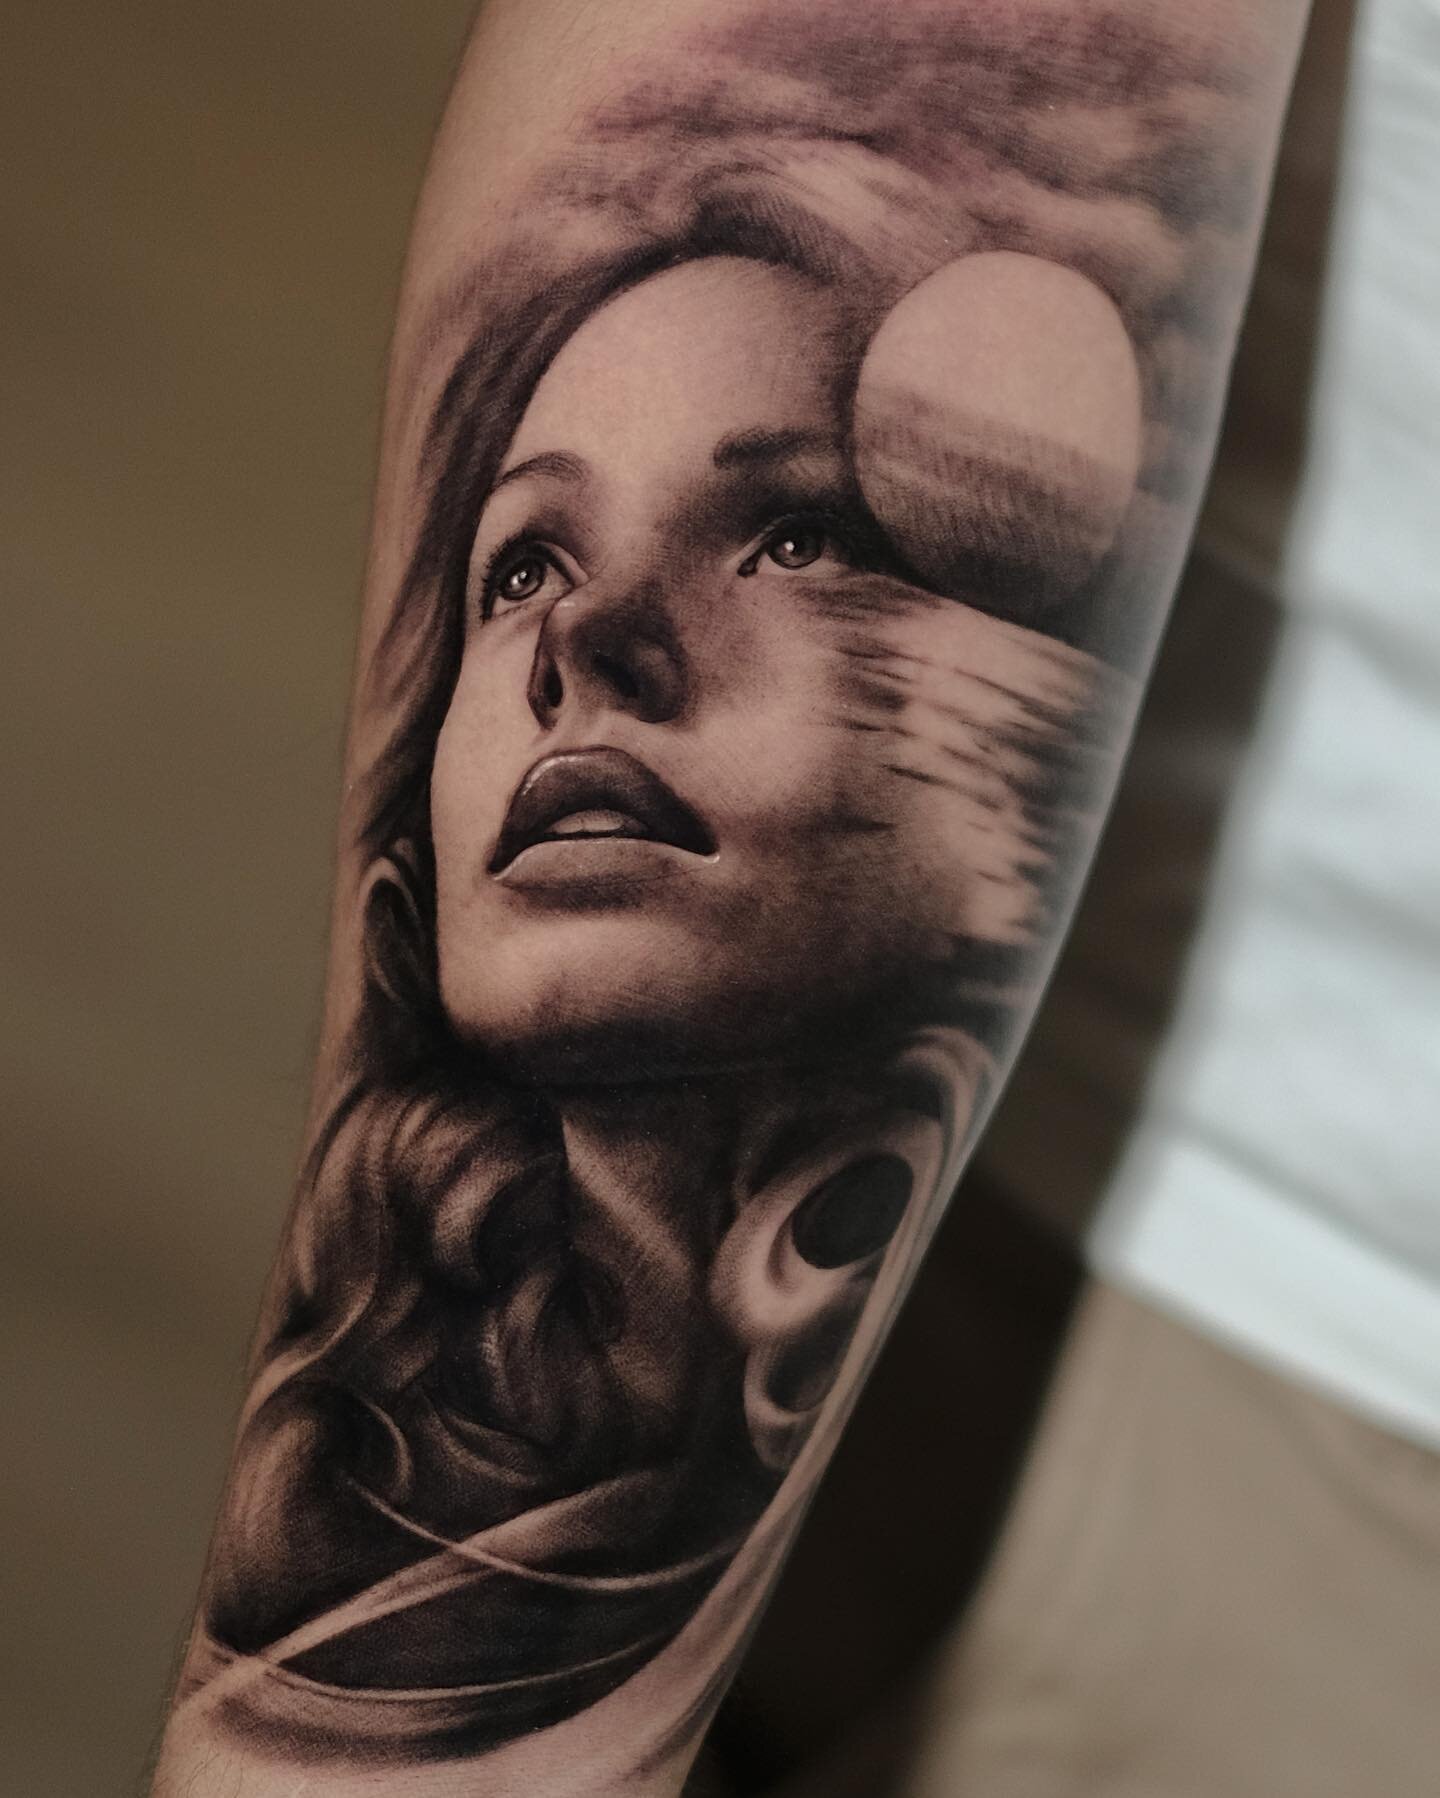 🔸Done by @miguelameliach 

📣 Book your appointment!
📧 : rdv@atlastattoo.lu⁣⁣
☎️ : 2 774 7074
📨 : DM Instagram / Facebook⁣⁣
📍 : 54 Bd Grande-Duchesse Charlotte, Luxembourg

#atlastattoolu #tattooluxembourg #luxembourgtattoo #luxembourg #tattoo #t